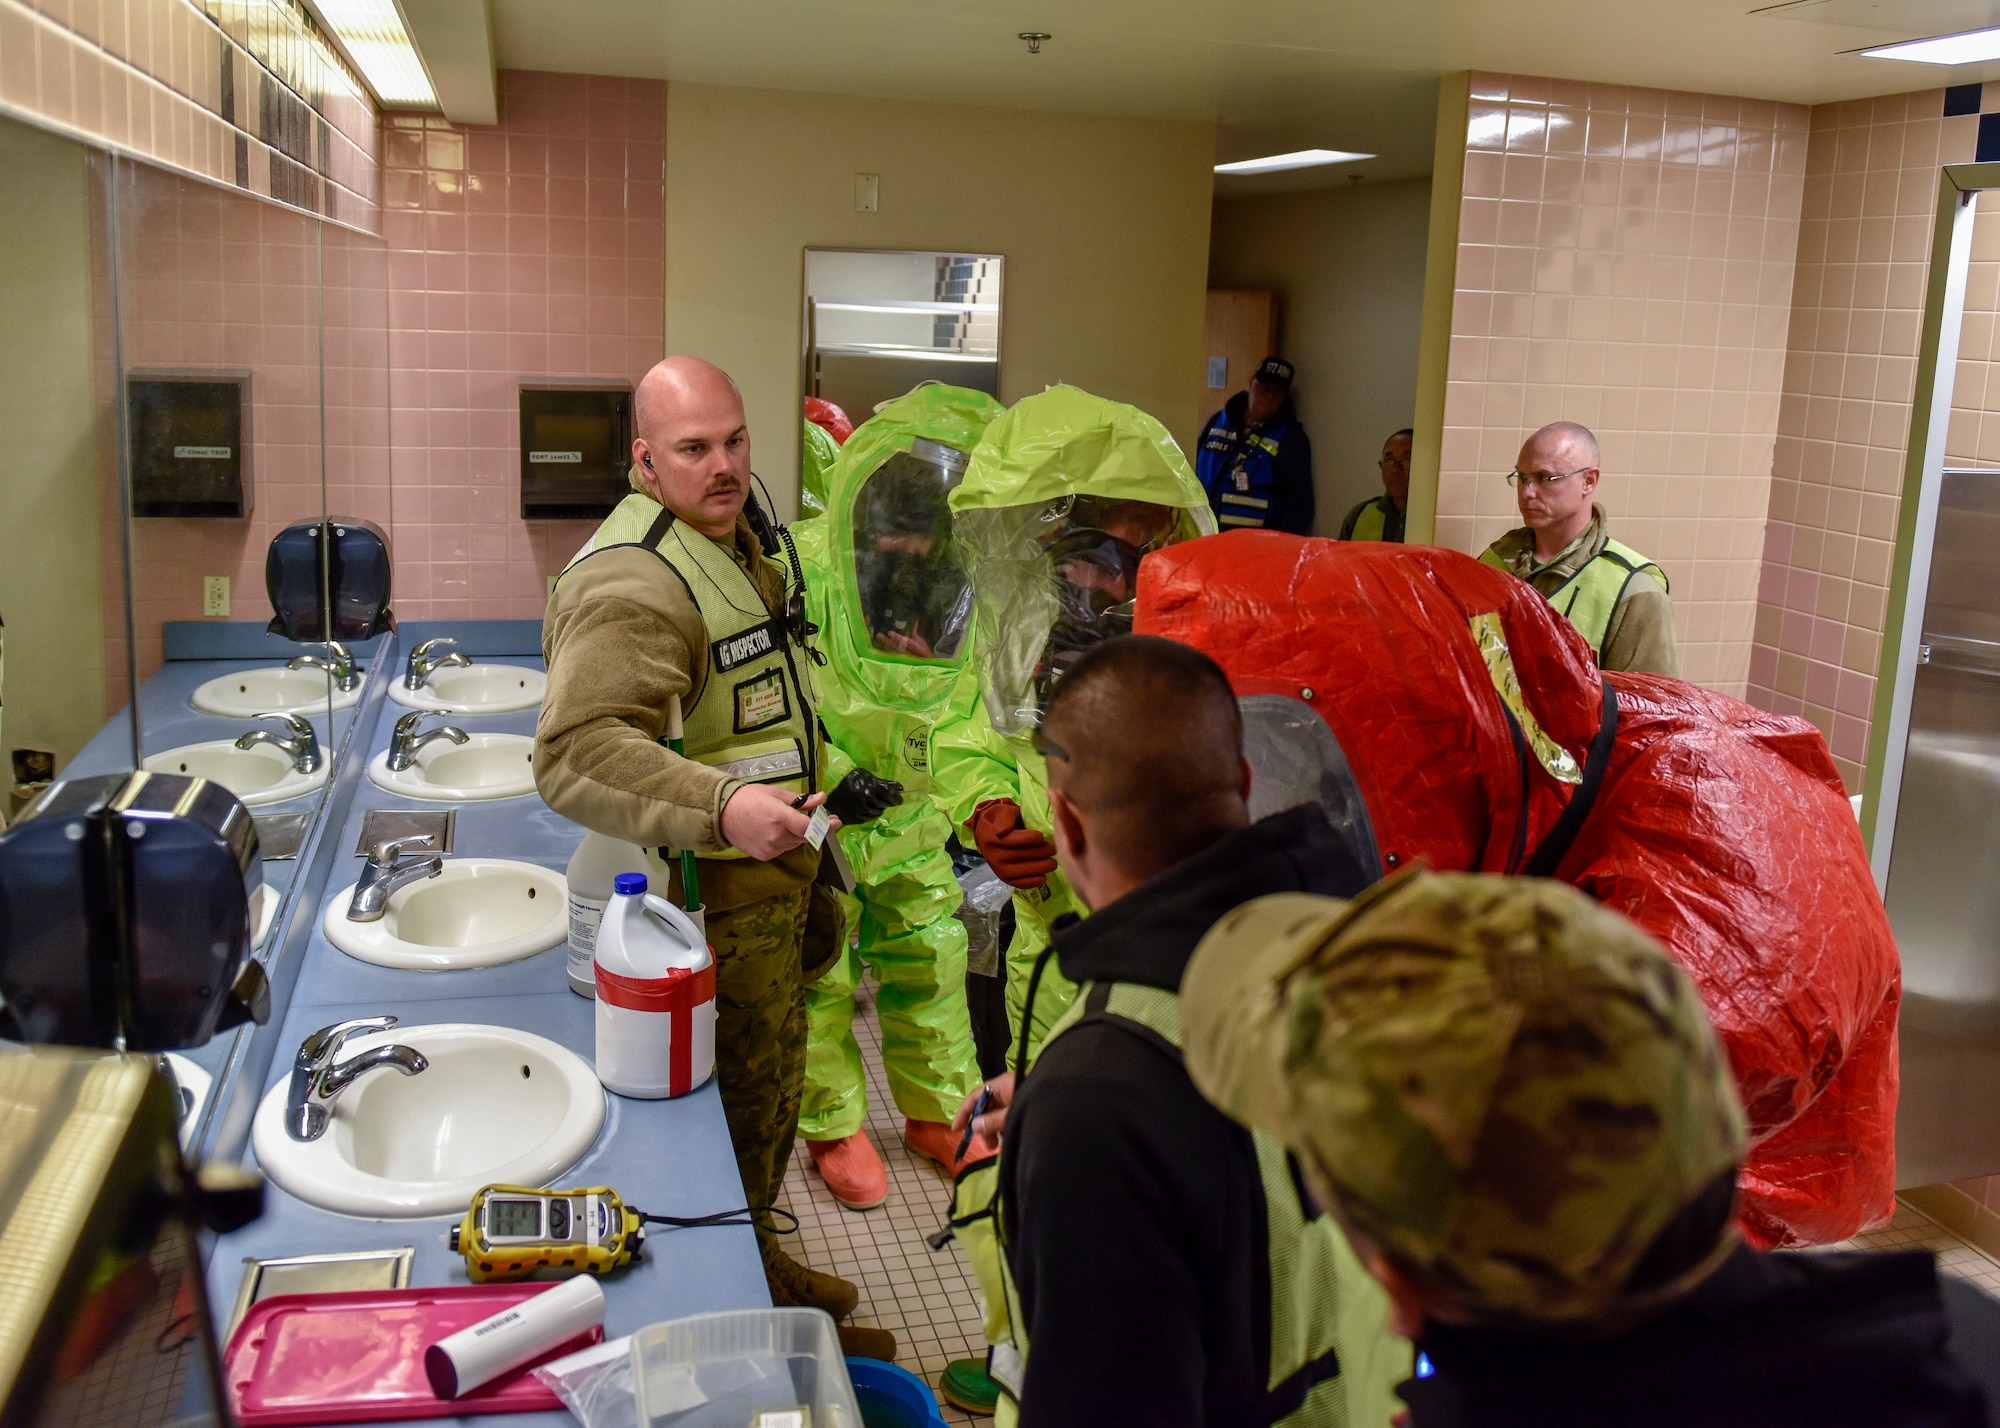 Participants and inspectors in exercise Global Thunder 20 clarify chemical findings during a simulated chemical, biological, radiological and nuclear emergency at Kirtland Air Force Base, N.M., Oct. 24, 2019. Global Thunder is a U.S. Strategic Command exercise designed to ensure an efficient mission response by testing Airmen's ability to execute command, control and operational procedures during a notional scenario. (U.S. Air Force photo by Airman 1st Class Austin J. Prisbrey)